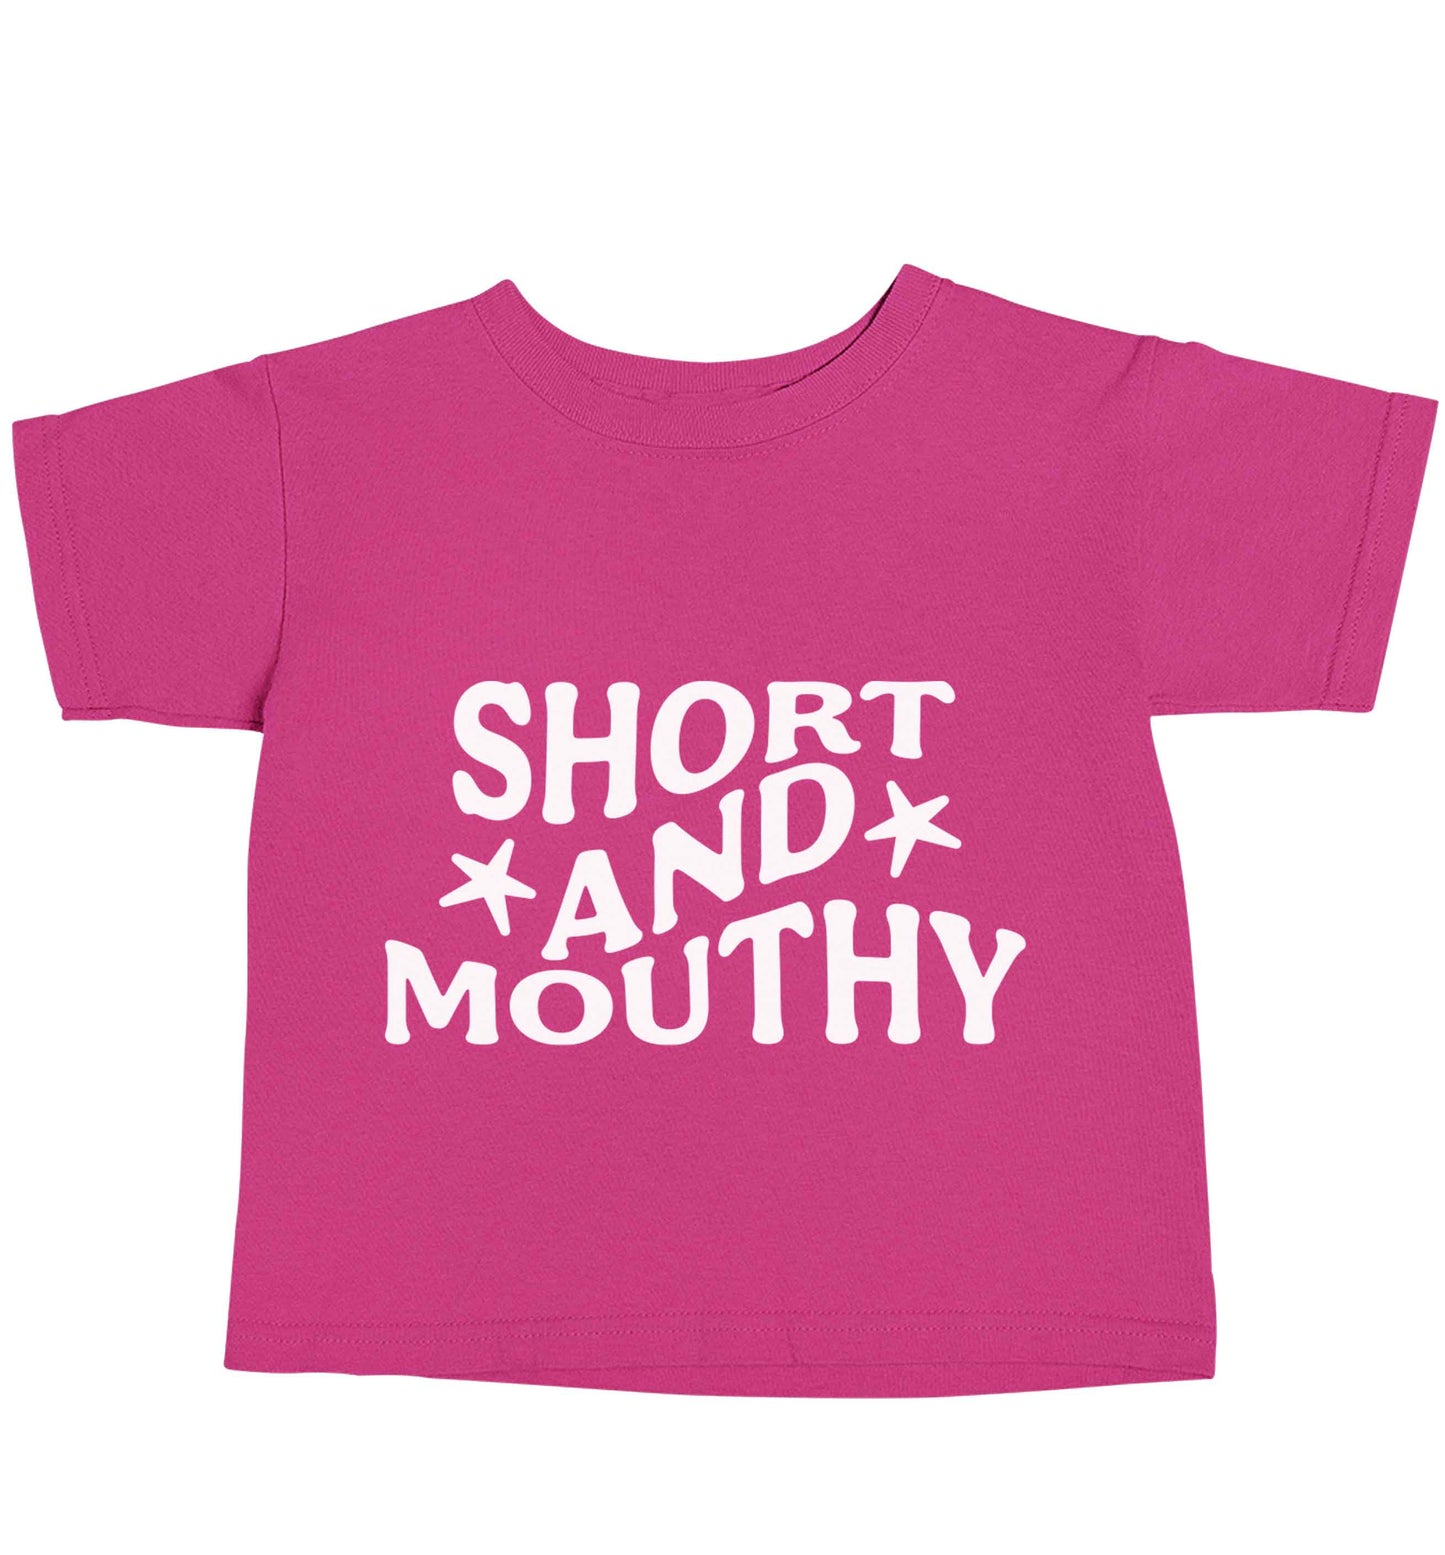 Short and mouthy pink baby toddler Tshirt 2 Years